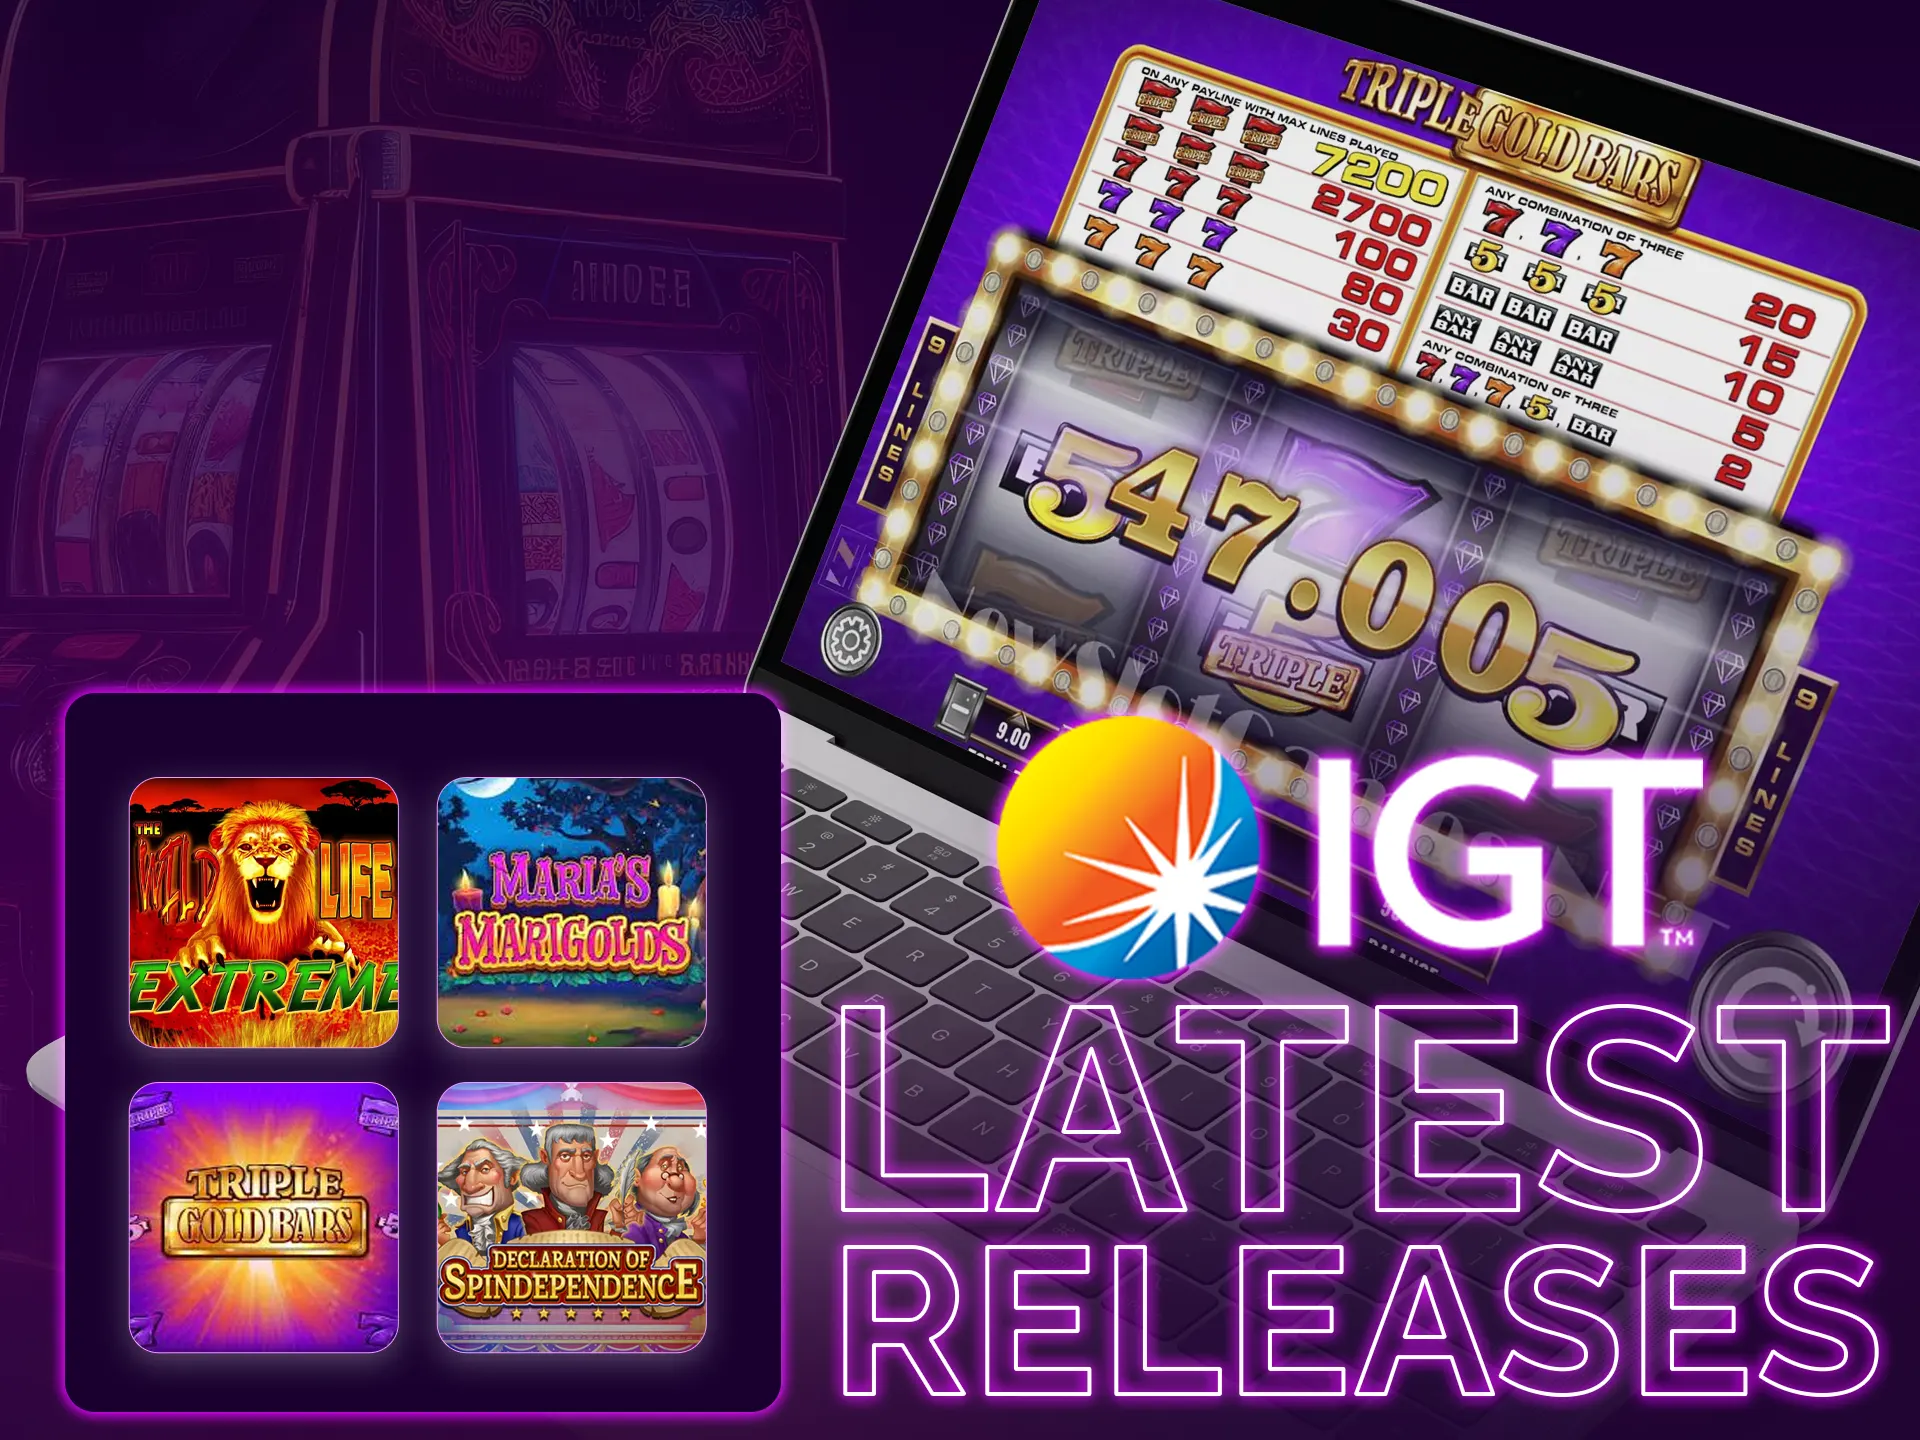 Meet latest releases from IGT game provider.